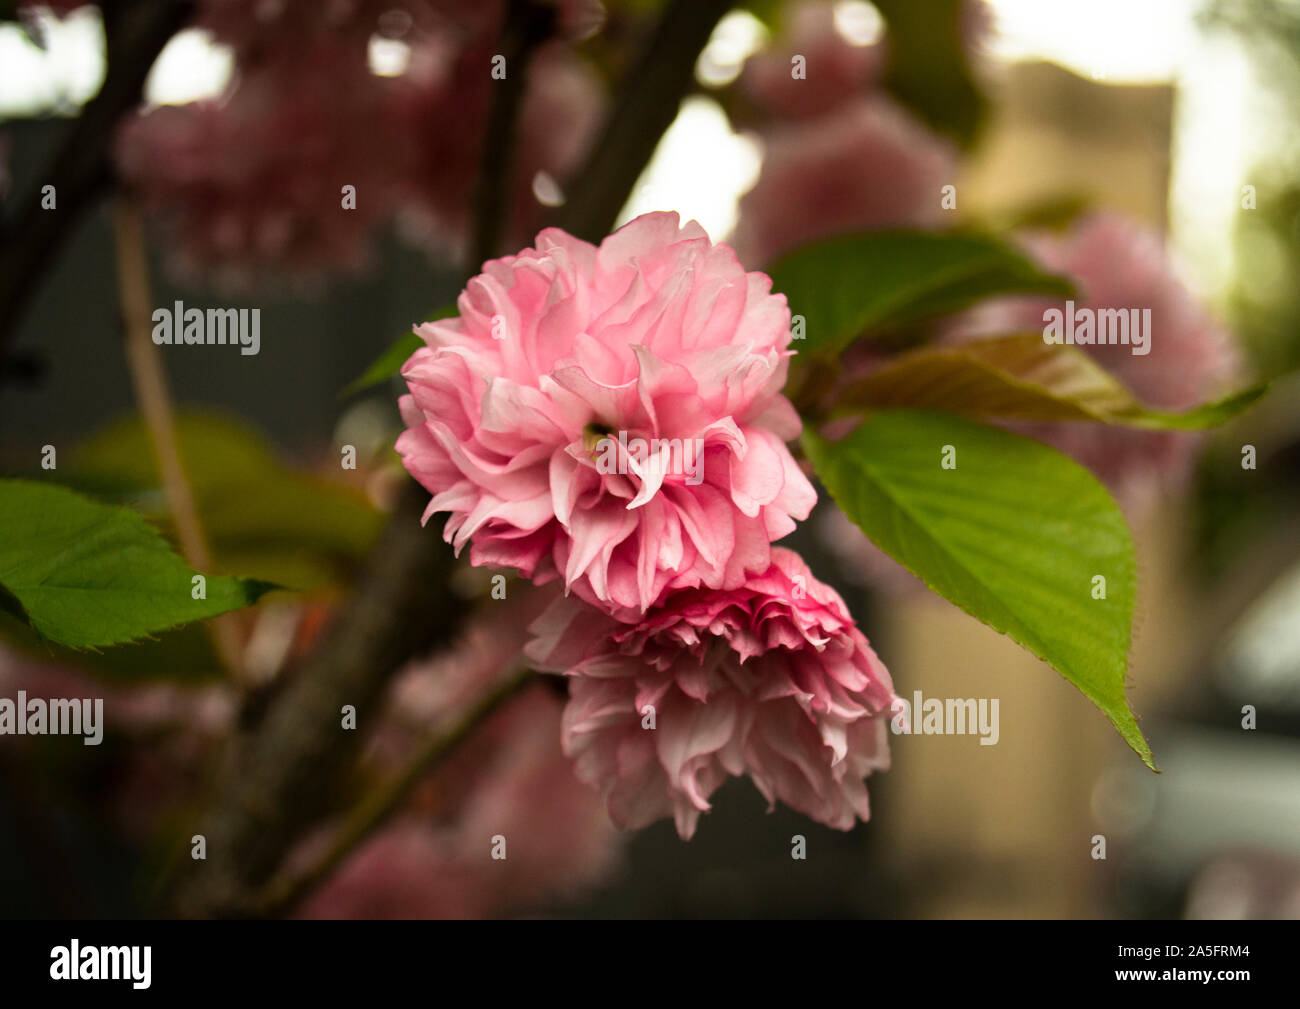 Cherry blossom tree flower, taken in my garden. Shot with a Nikon D3100, and edited on Photoshop CC 2019. Stock Photo